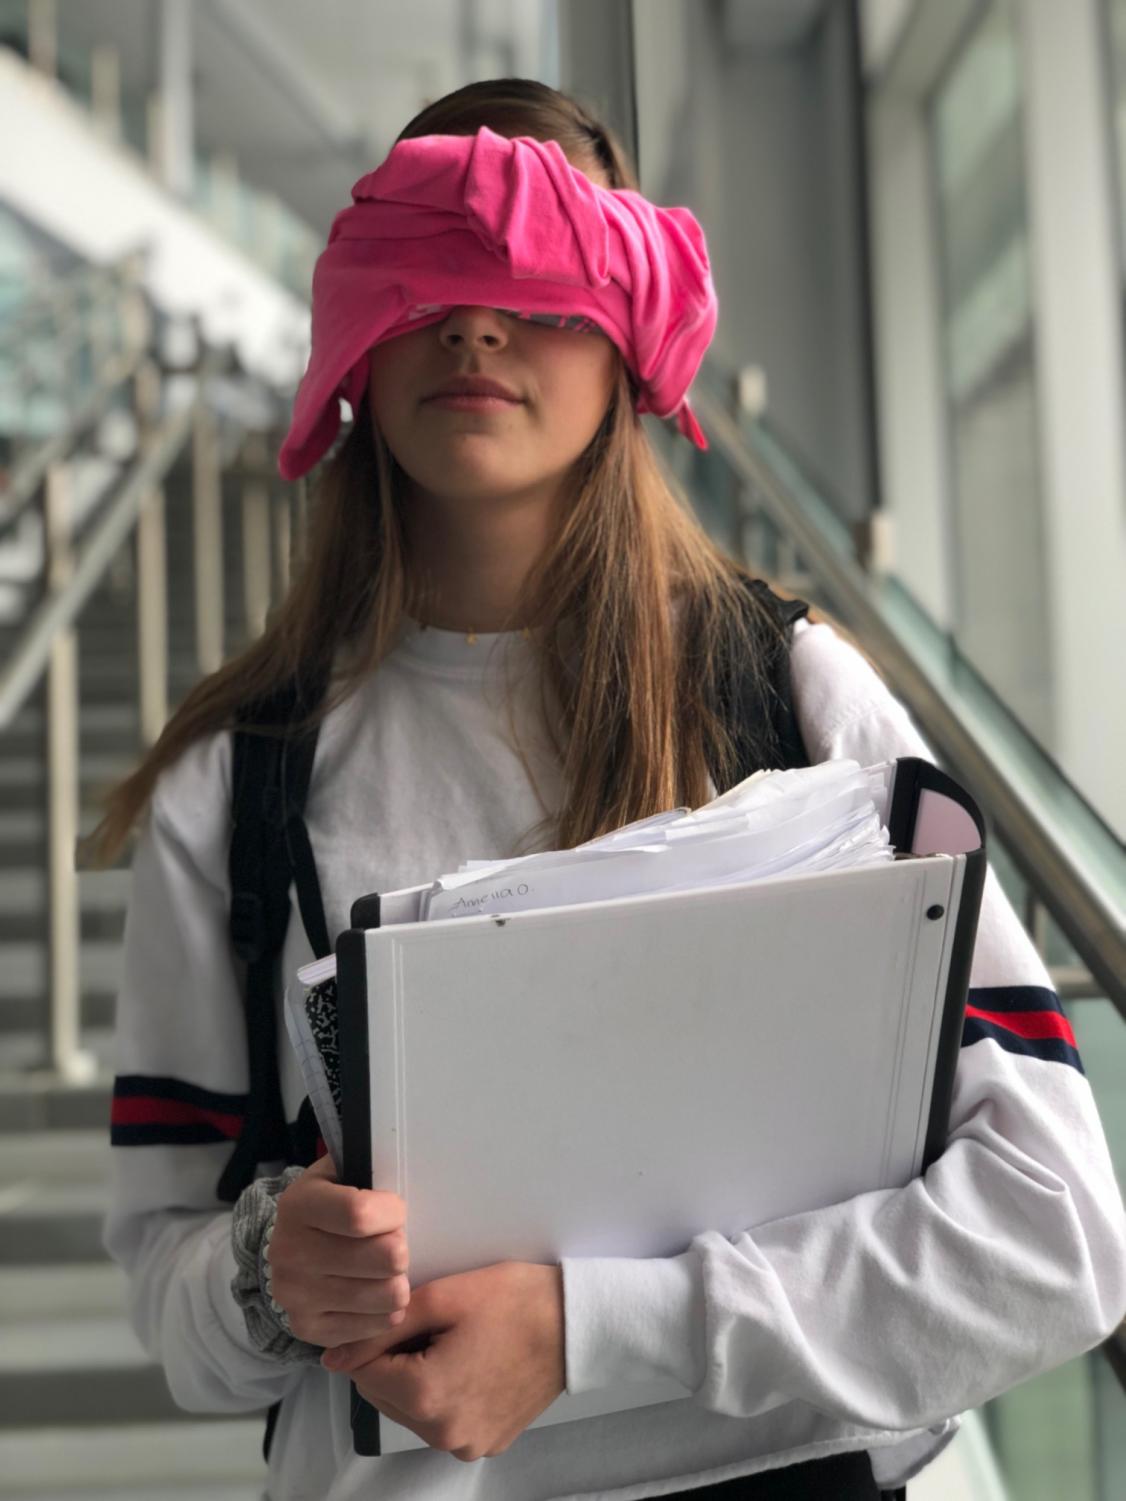 Many people have participated in the Bird Box Challenge.